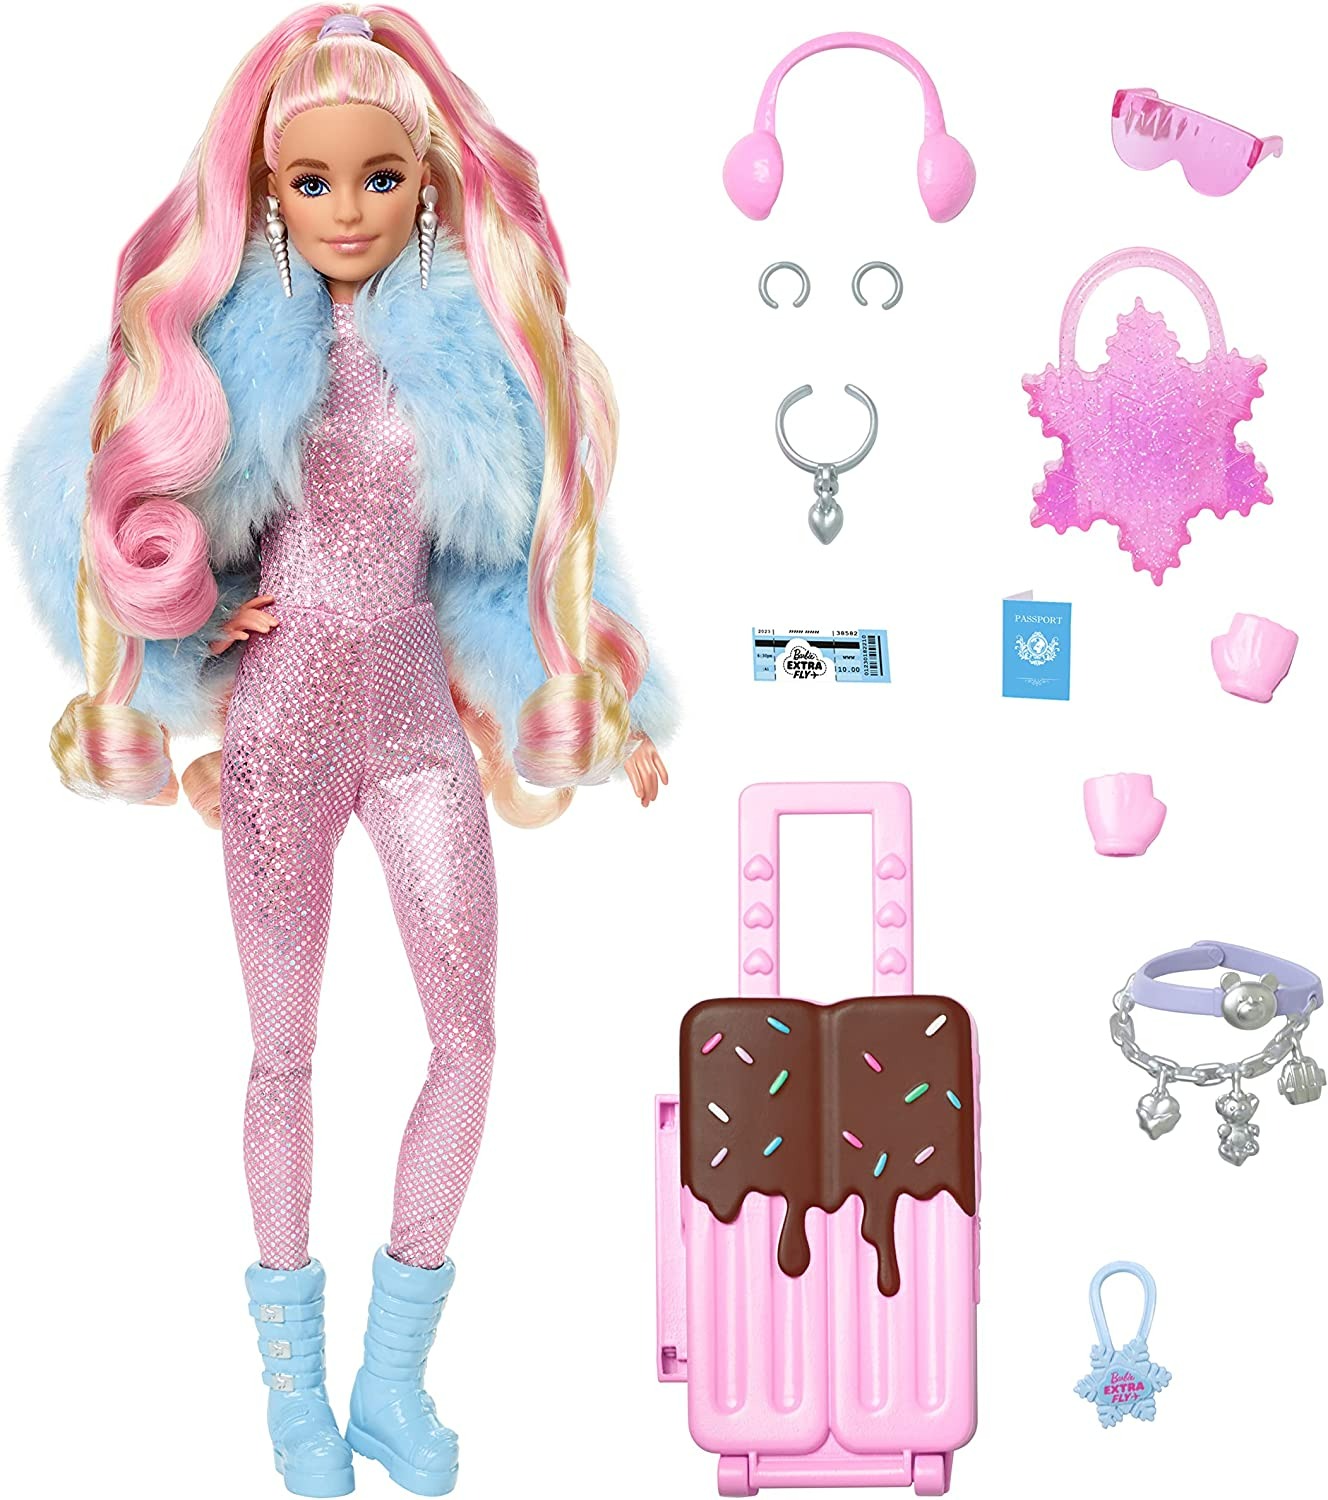 Travel Barbie Doll with Wintery Snow Fashion